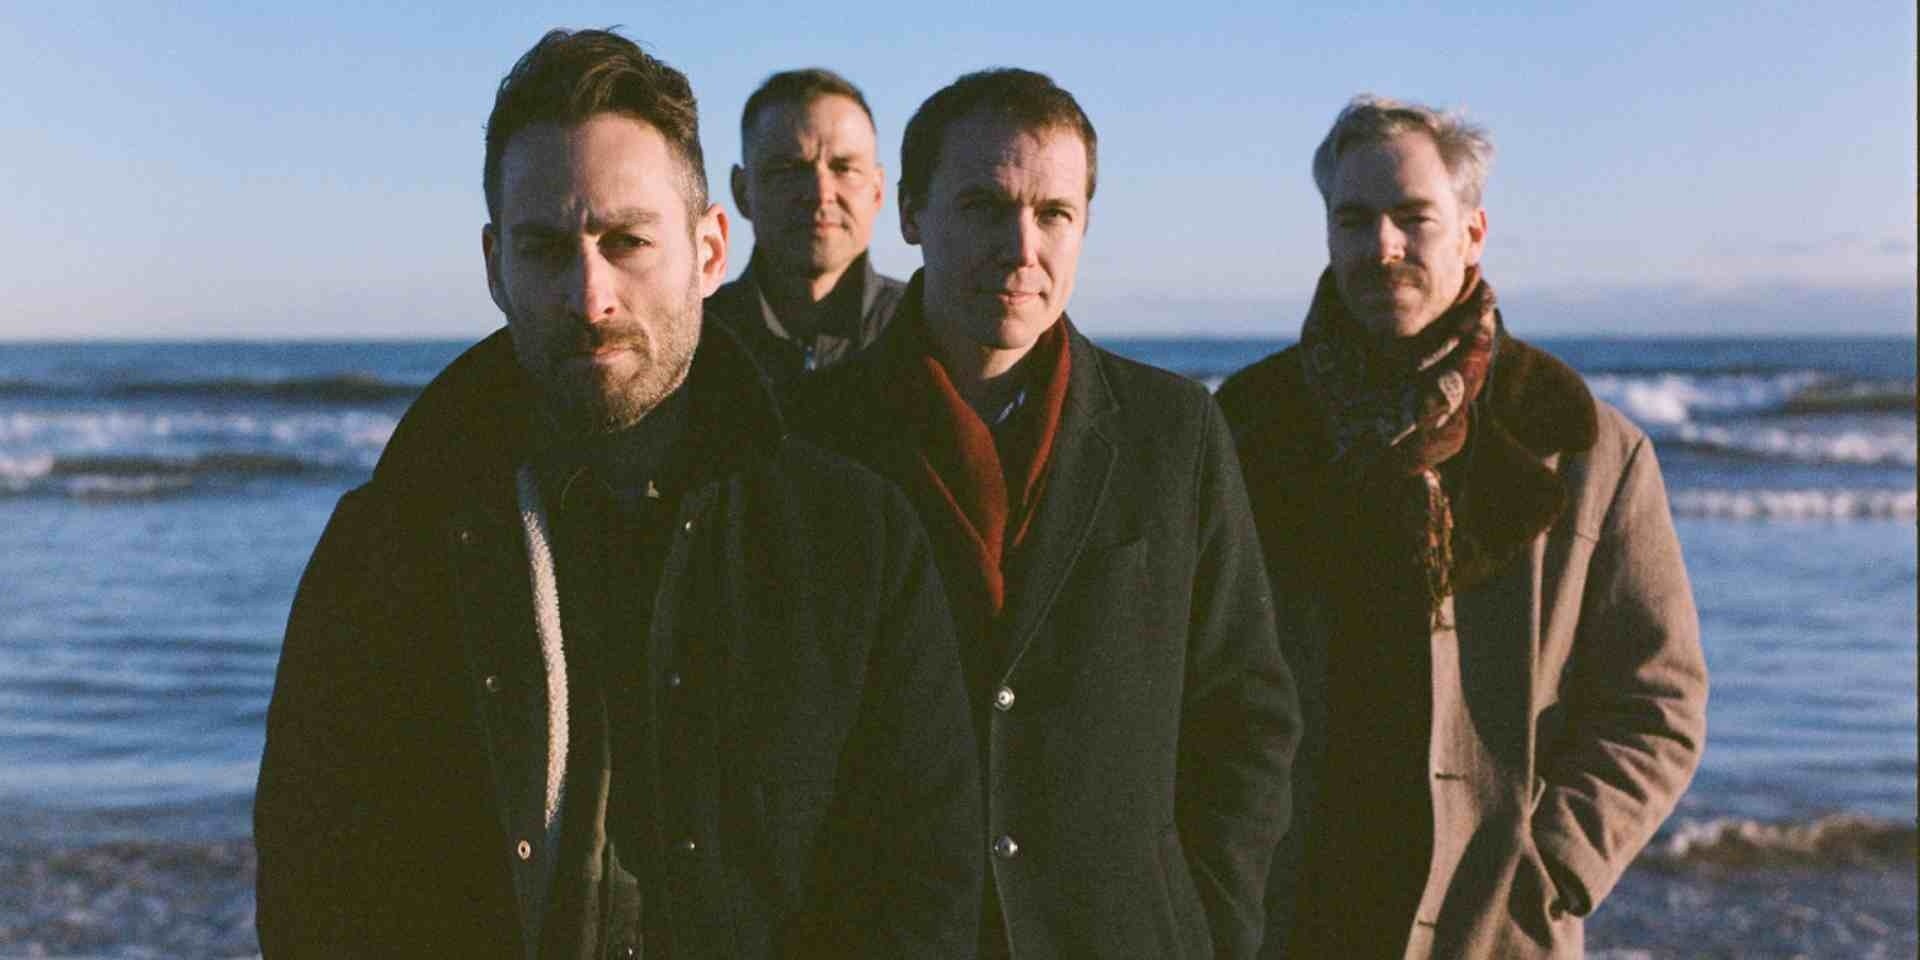 "I think that we are all kind of at a distance from emo": An interview with American Football's Nate Kinsella